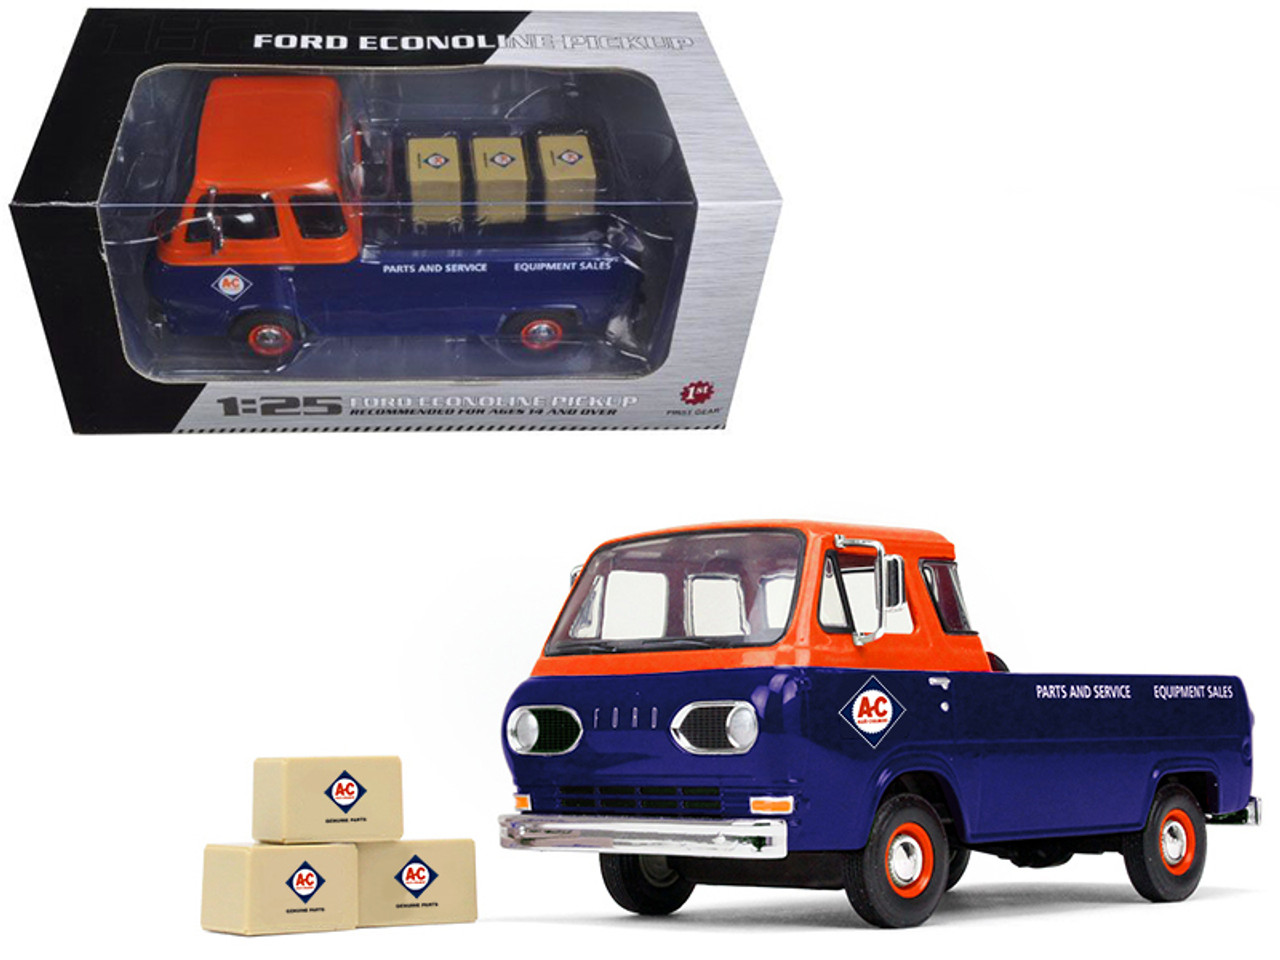 1960's Ford Econoline Pickup with Boxes Allis-Chalmers Parts & Service 1/25 Diecast Model Car by First Gear